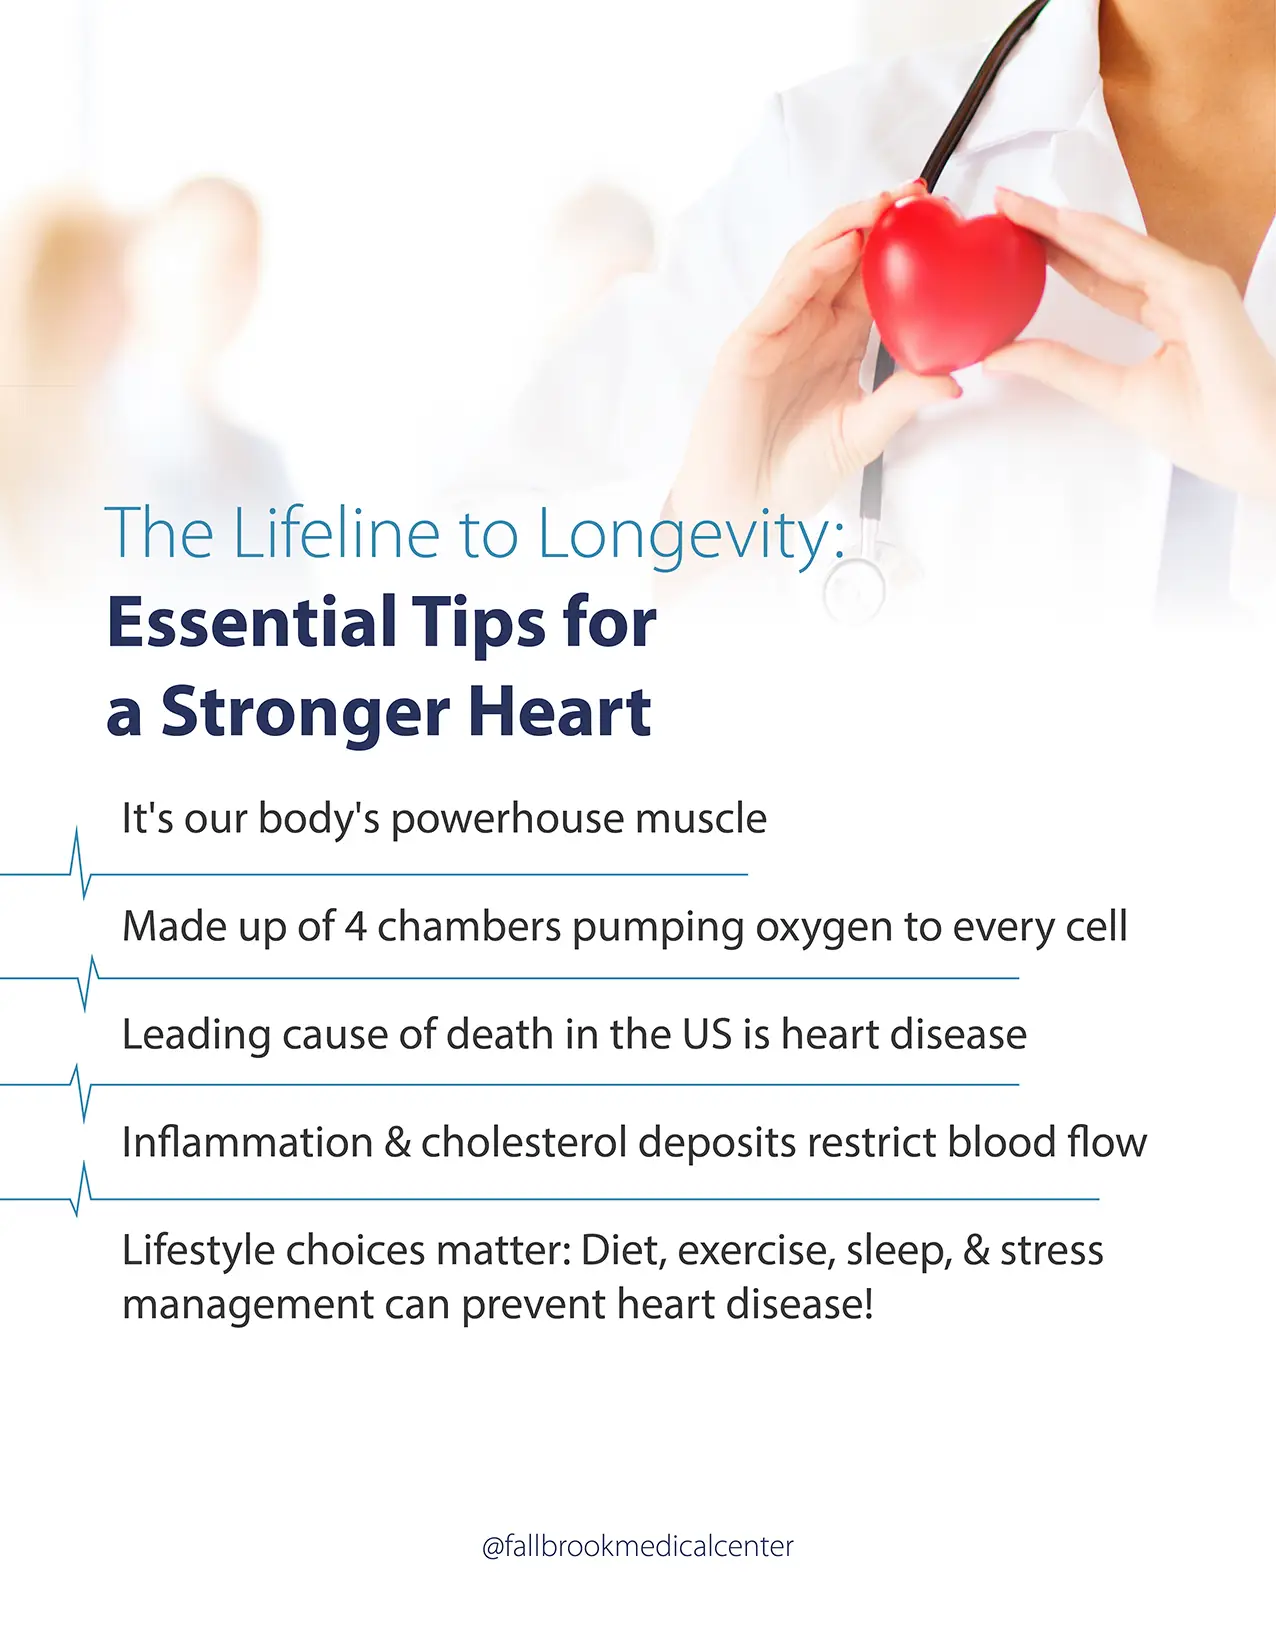 Lifeline to Longevity Essential Tips for a Stronger Heart